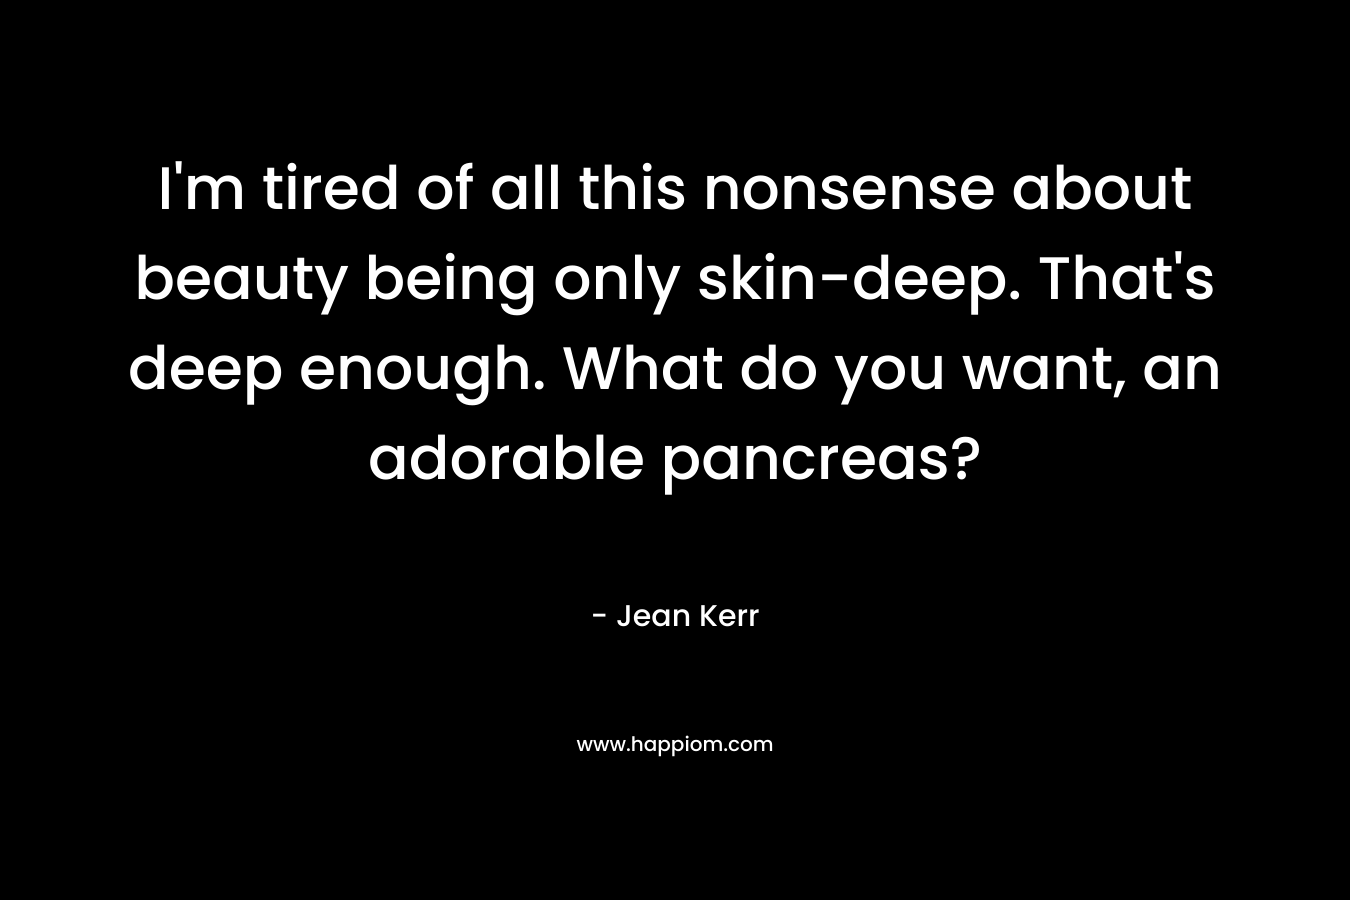 I’m tired of all this nonsense about beauty being only skin-deep. That’s deep enough. What do you want, an adorable pancreas? – Jean Kerr